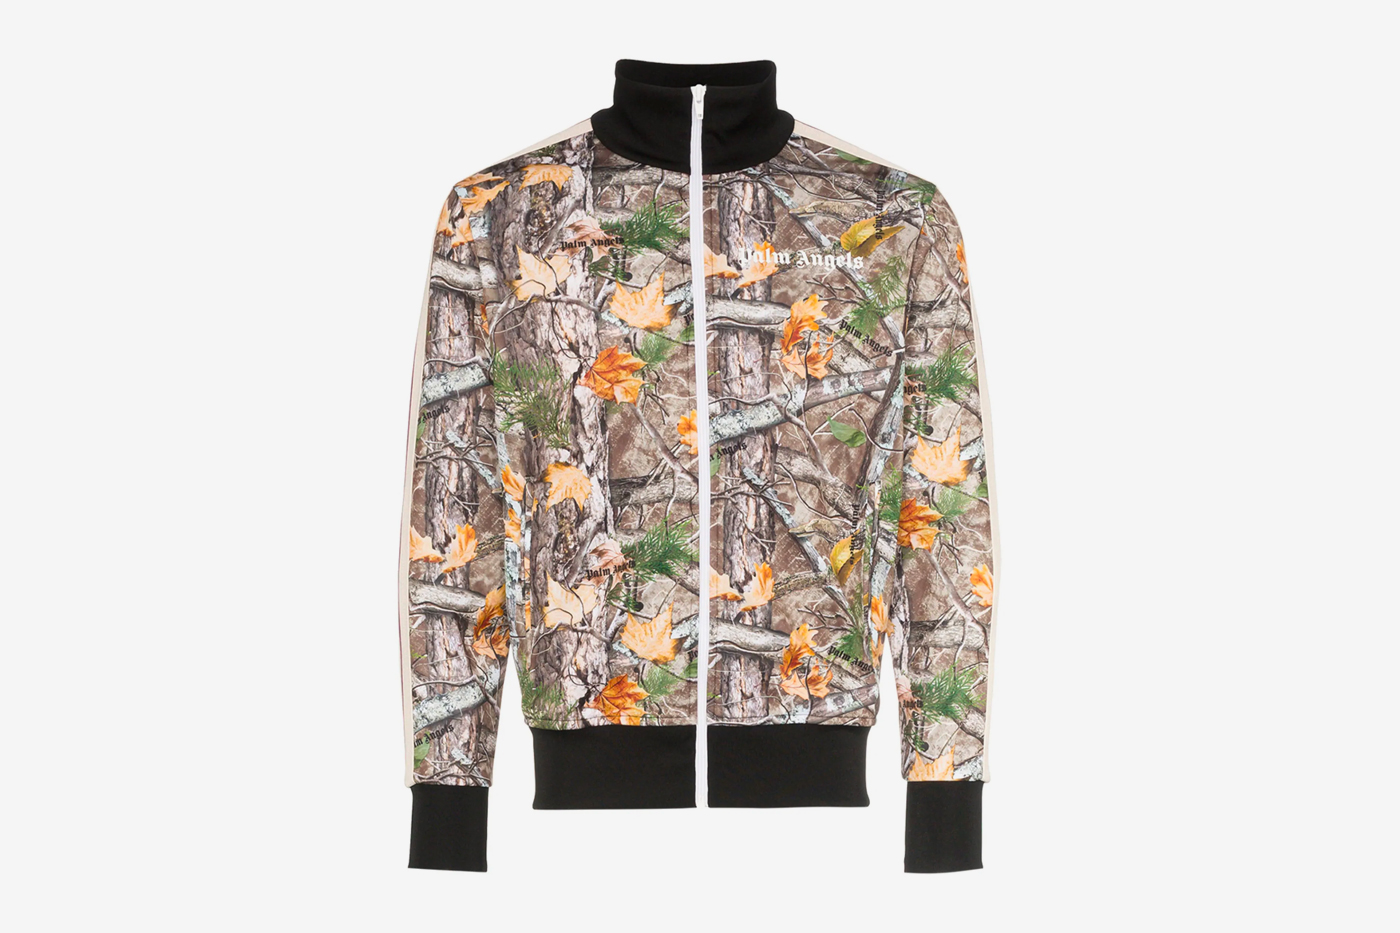 https://hypebeast.com/image/2019/07/palm-angels-palm-angels-woodland-camouflage-print-track-suit-001.jpg